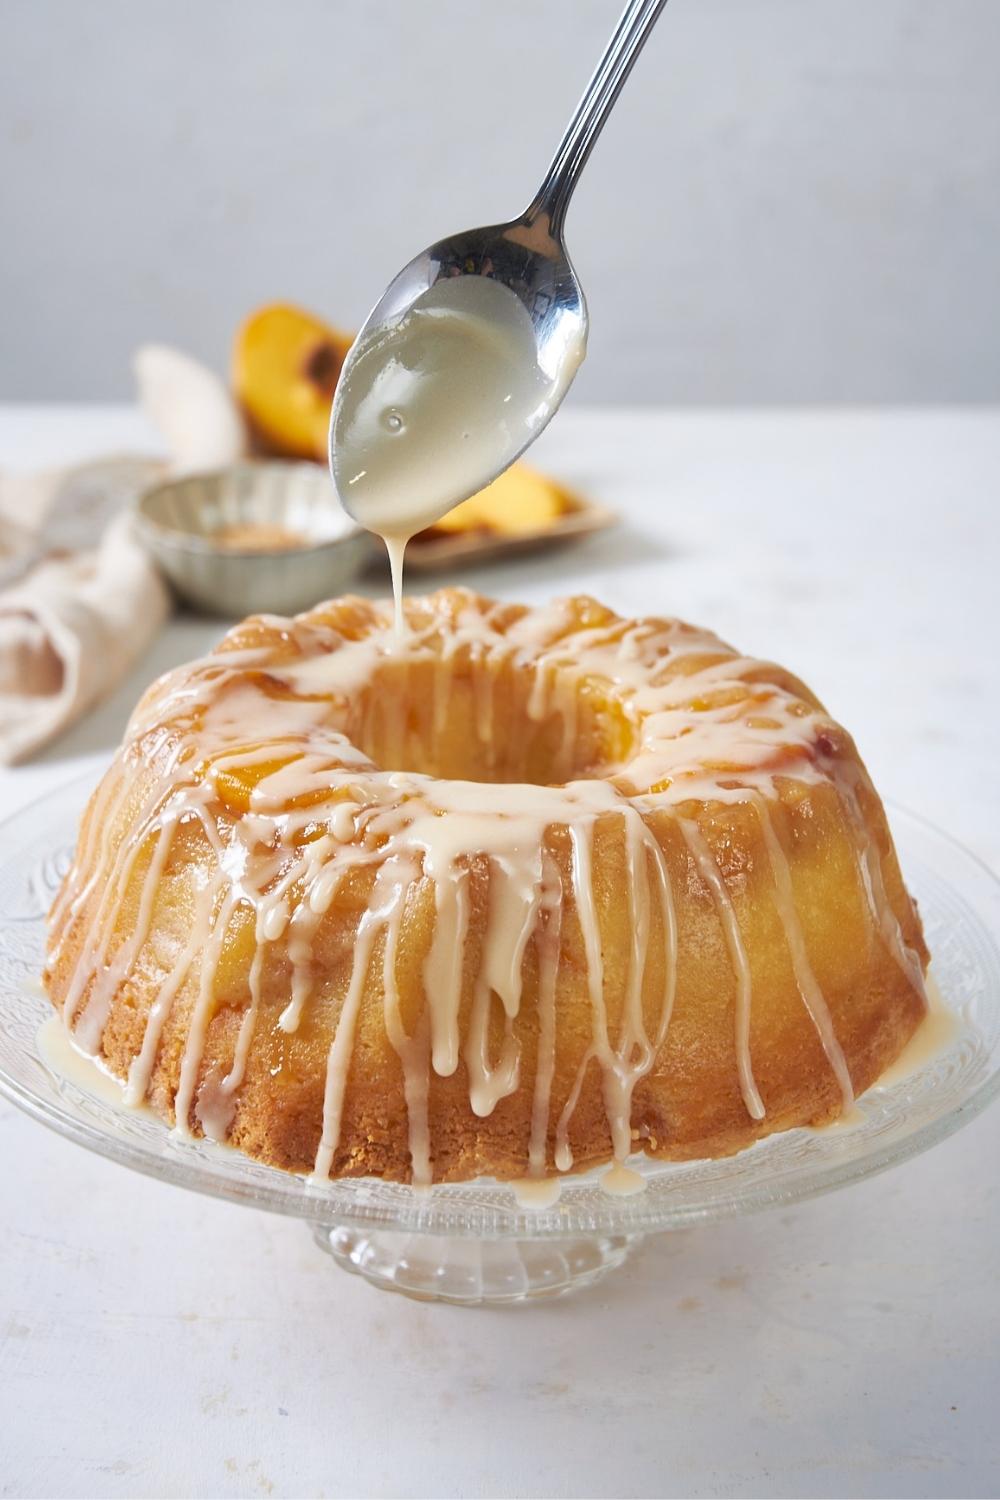 A spoon drizzling icing on top of a peach cobbler bundt cake.